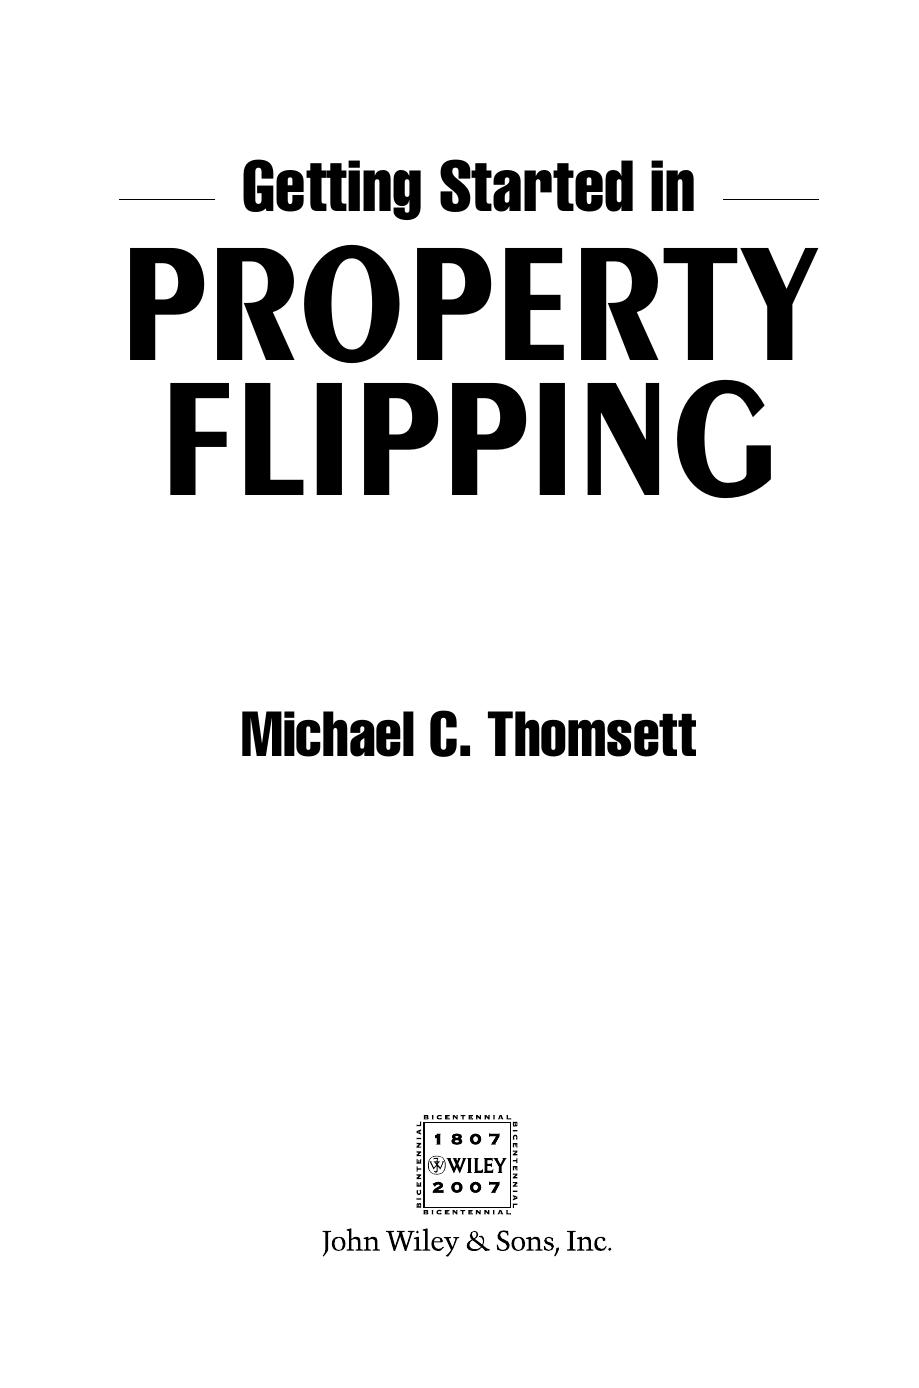 Getting Started in Property Flipping by Michael C. Thomsett